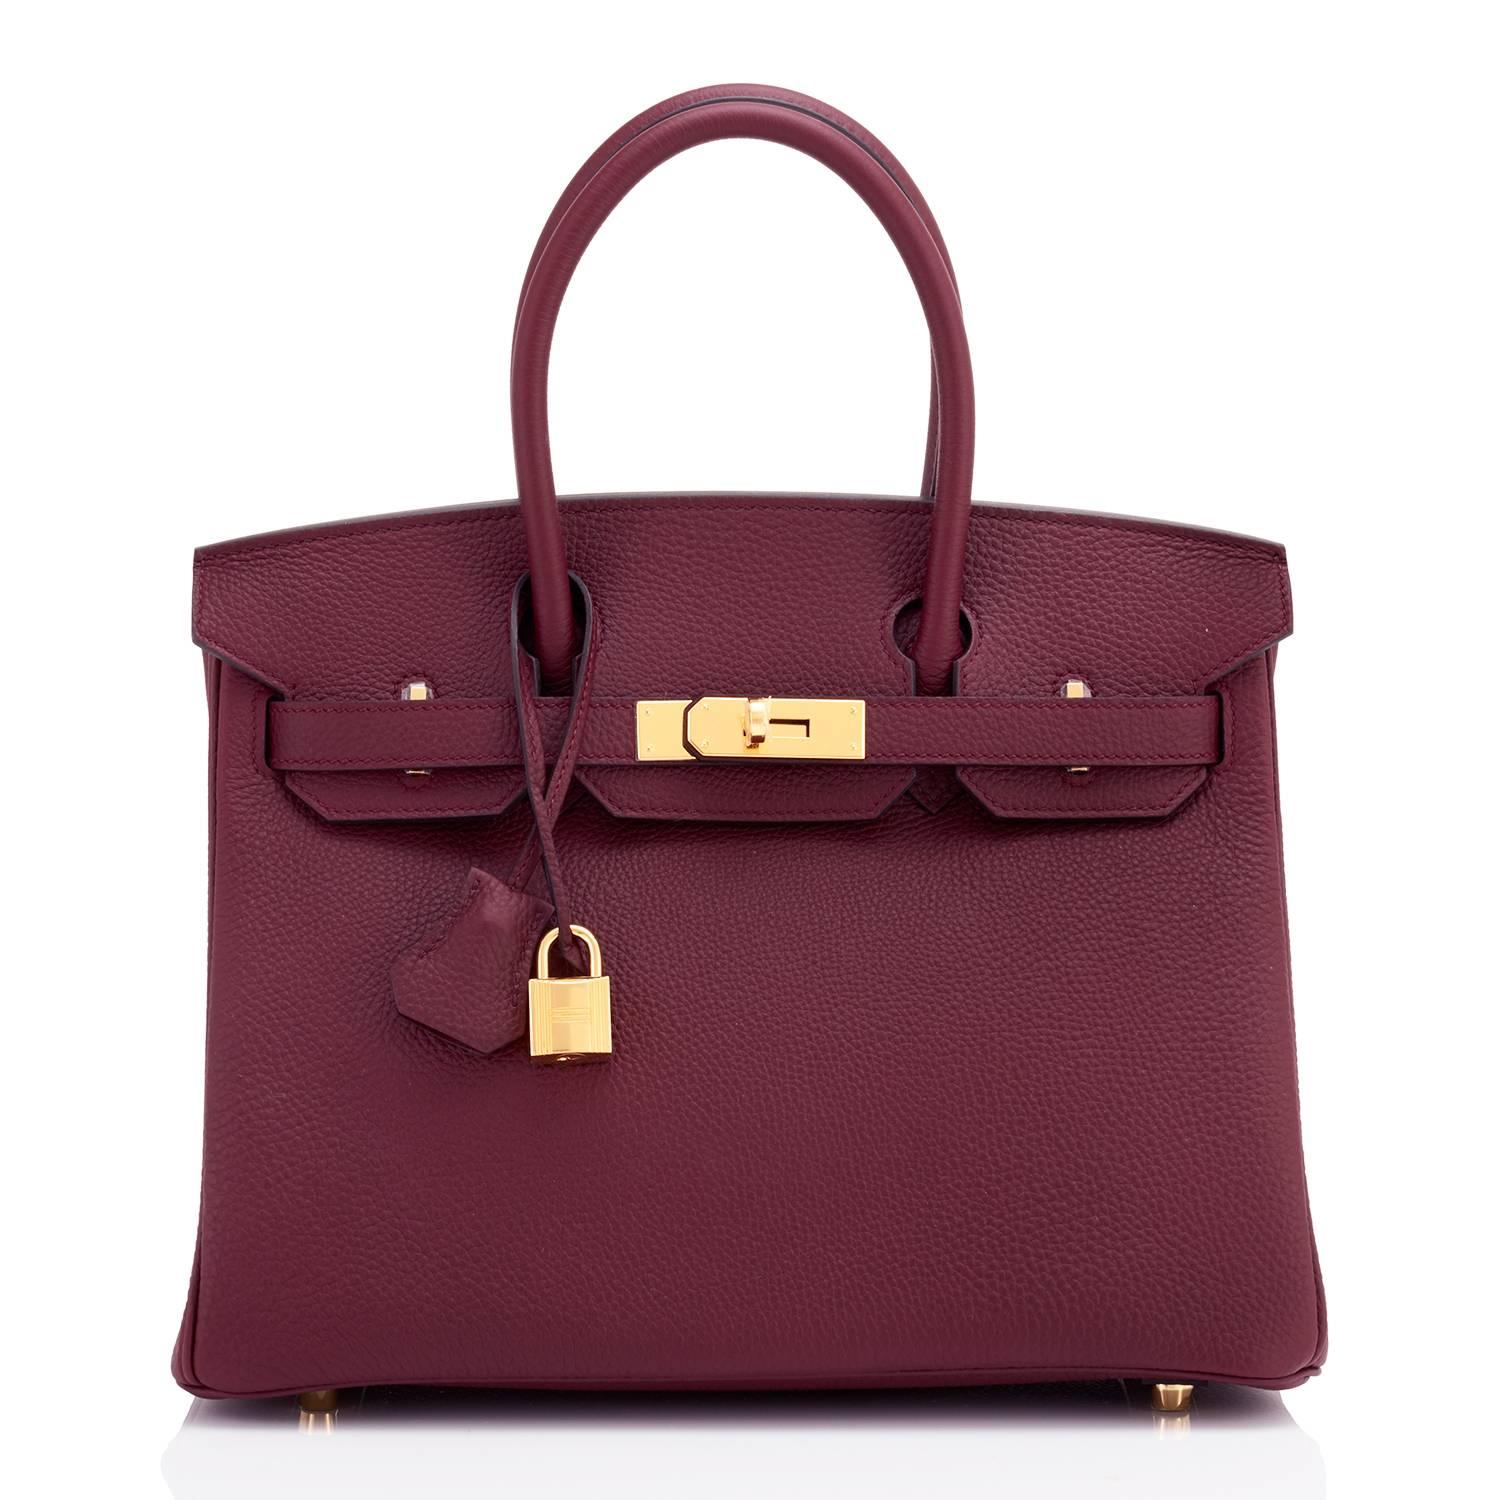 Hermes Bordeaux 30cm Birkin Togo Gold Hardware A Stamp 
Brand New in Box. Store fresh. Pristine condition (with plastic on hardware). 
Just purchased from Hermes store; bag bears new 2017 interior A stamp.
Perfect gift! Comes with keys, lock,